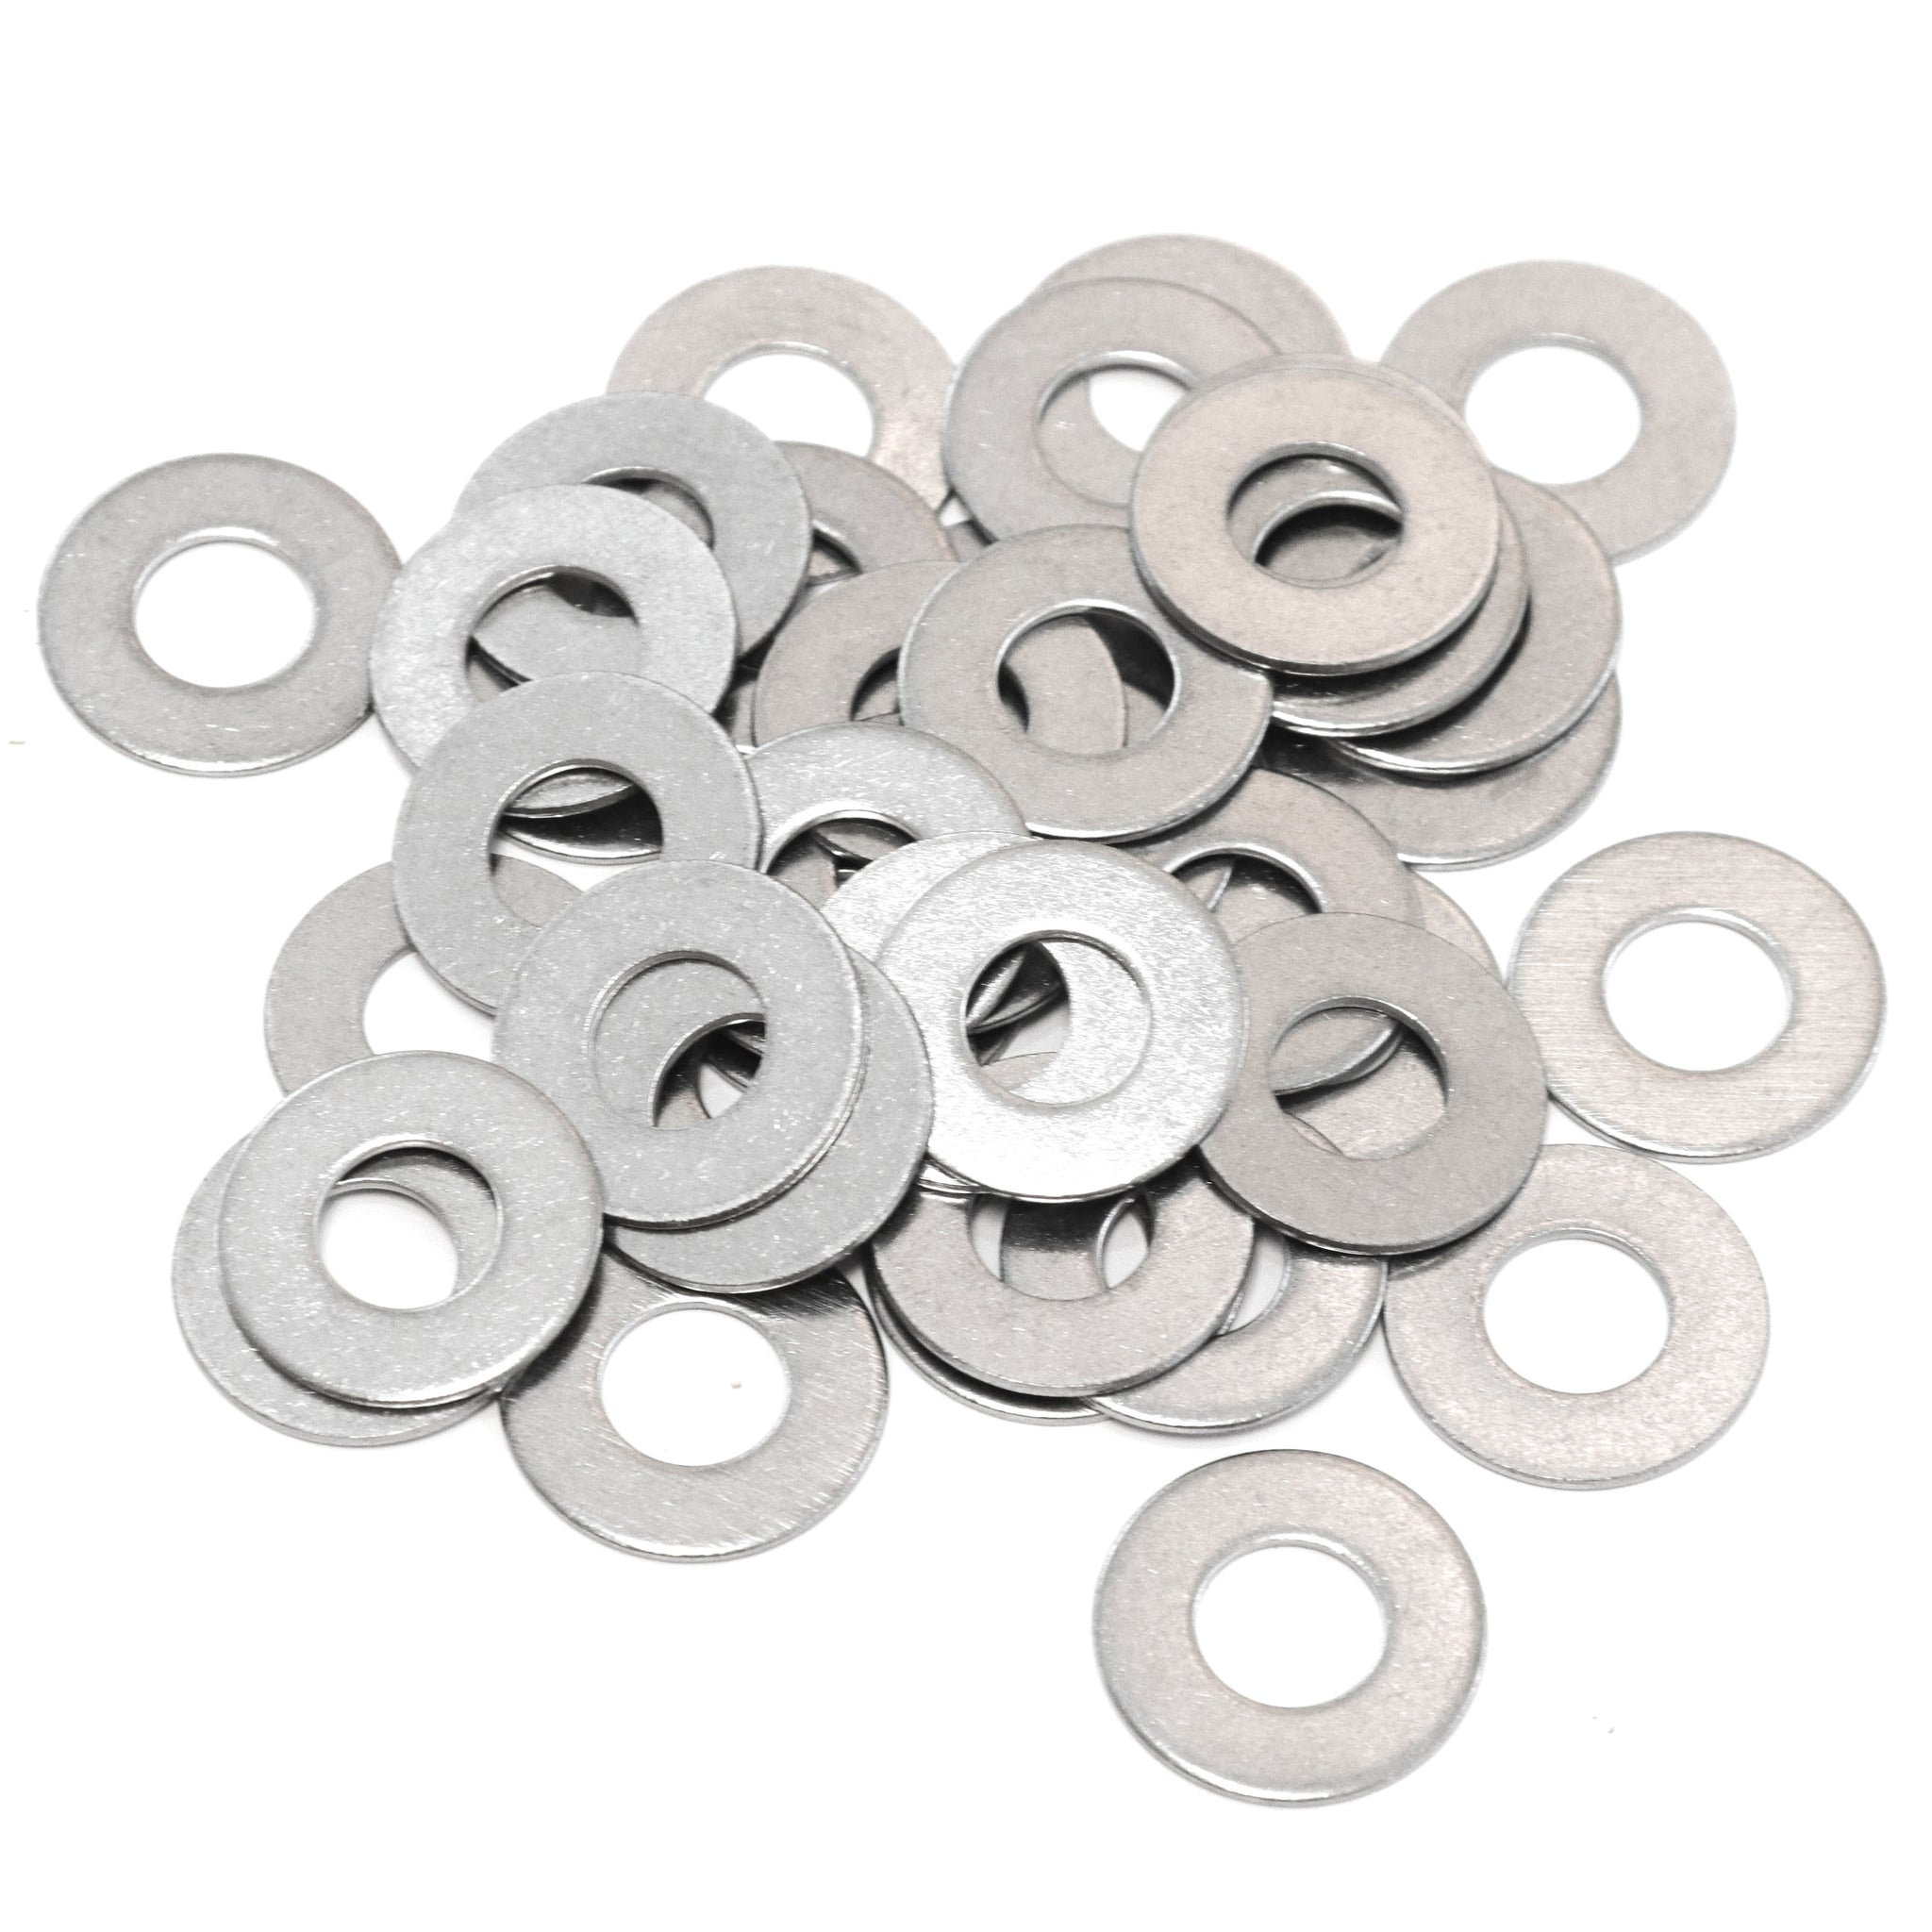 Red Hound Auto 40 Flat Standard Washers Set Fits 3/8 Inch .406 Inch ID Hole Size, .875 Inch OD for 304 SS Stainless Steel Corrosion Resistant